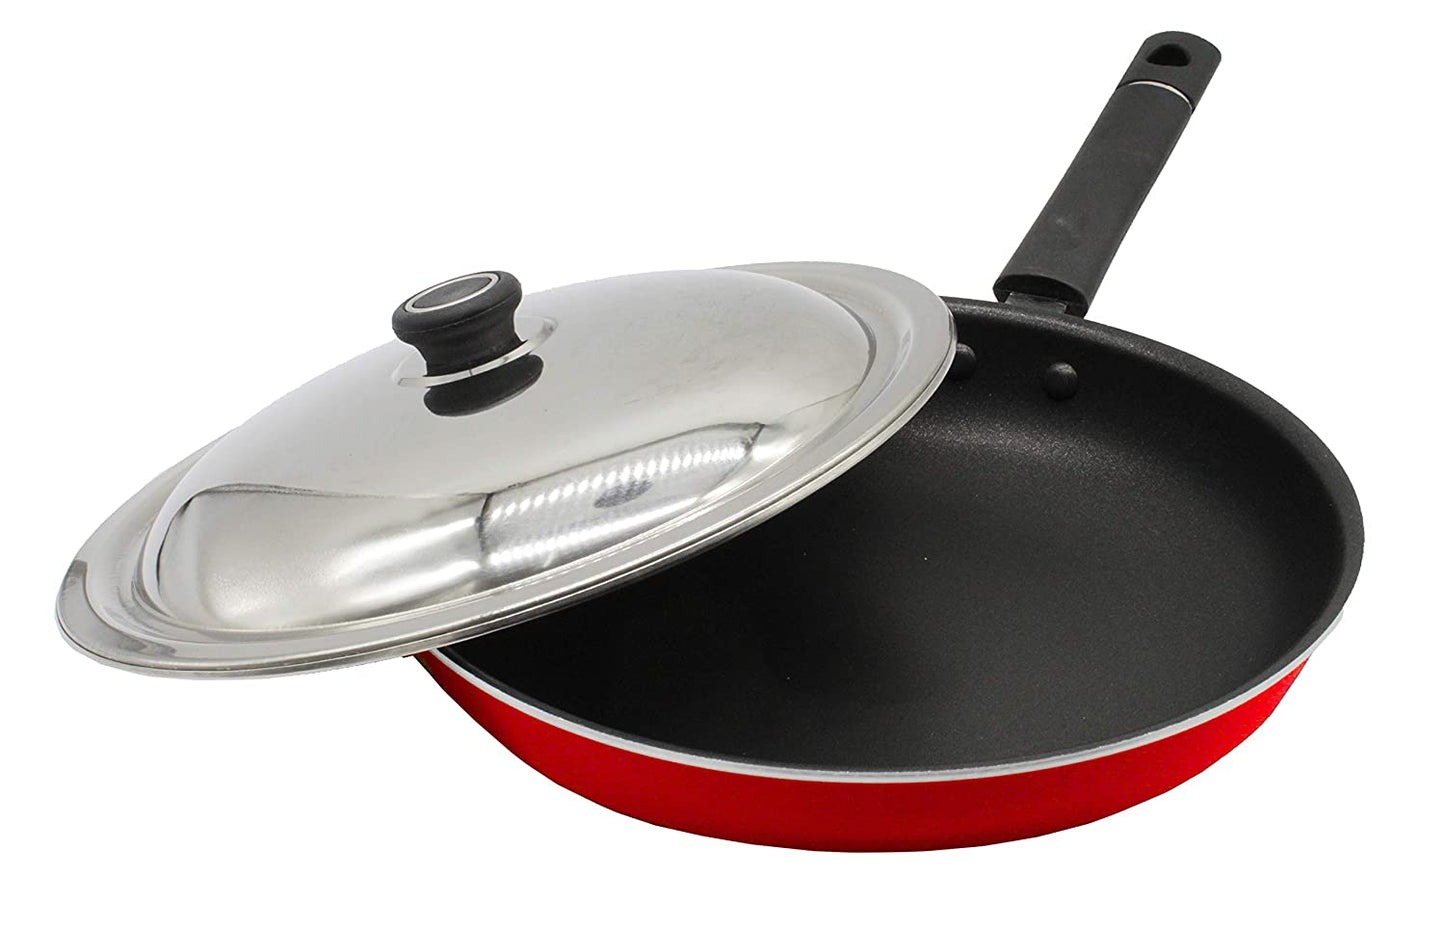 Nonstick Fry Pan with Stainless Steel Lid 24cm